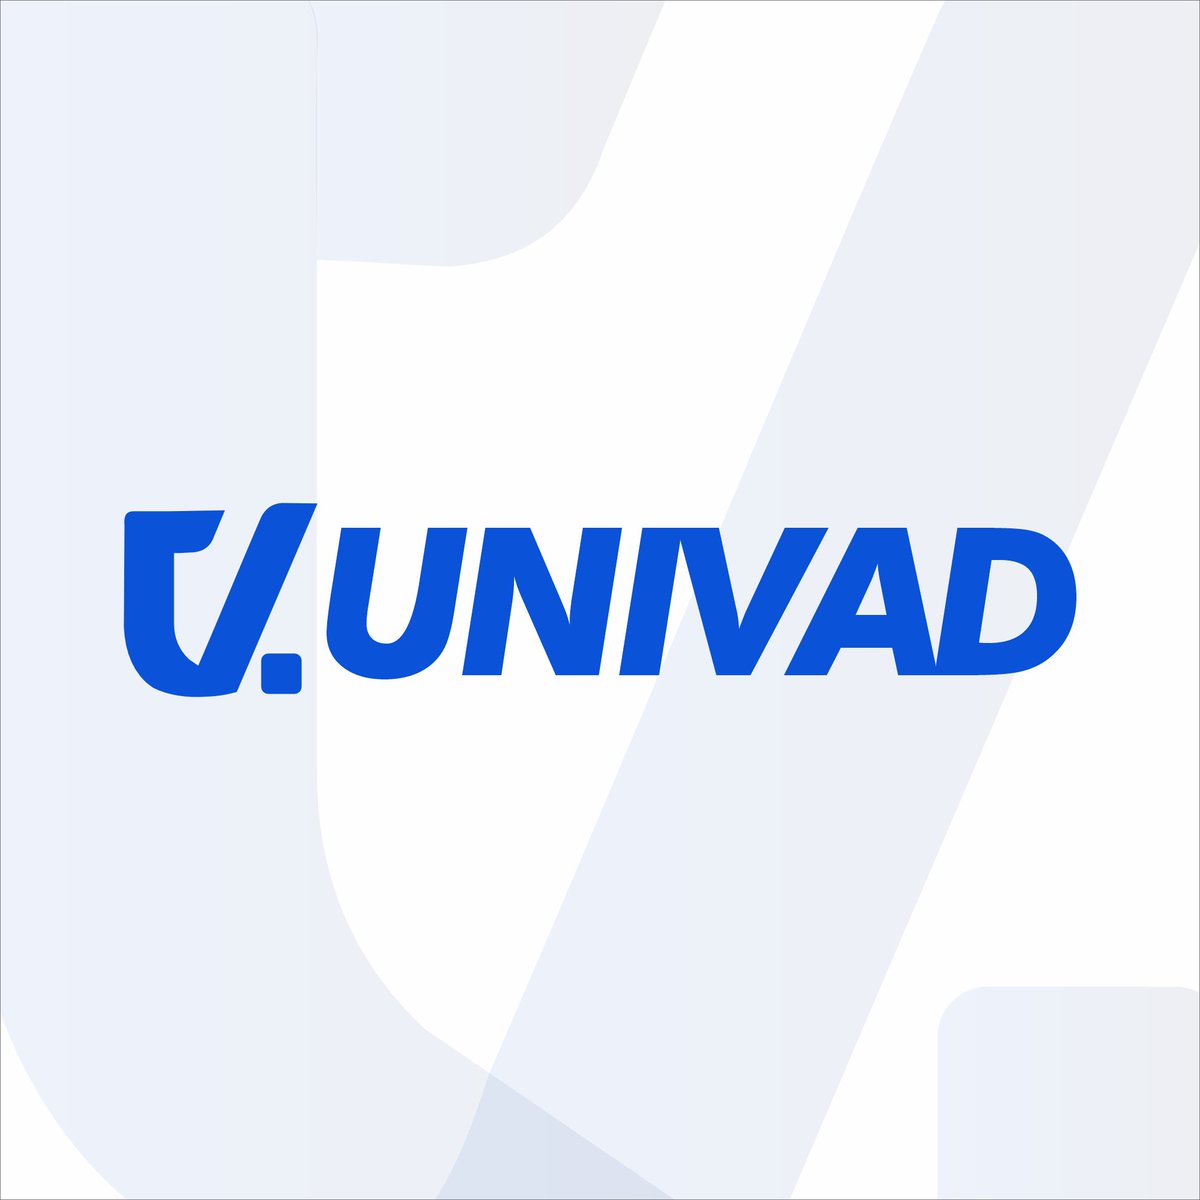 We announced the official launch of @UnivadOnline at our virtual conference, UnivadLive, today. 🚀 With this significant milestone, we bring you a next-generation online learning institution that offers certificate courses and Diploma programmes in in-demand skills and career…